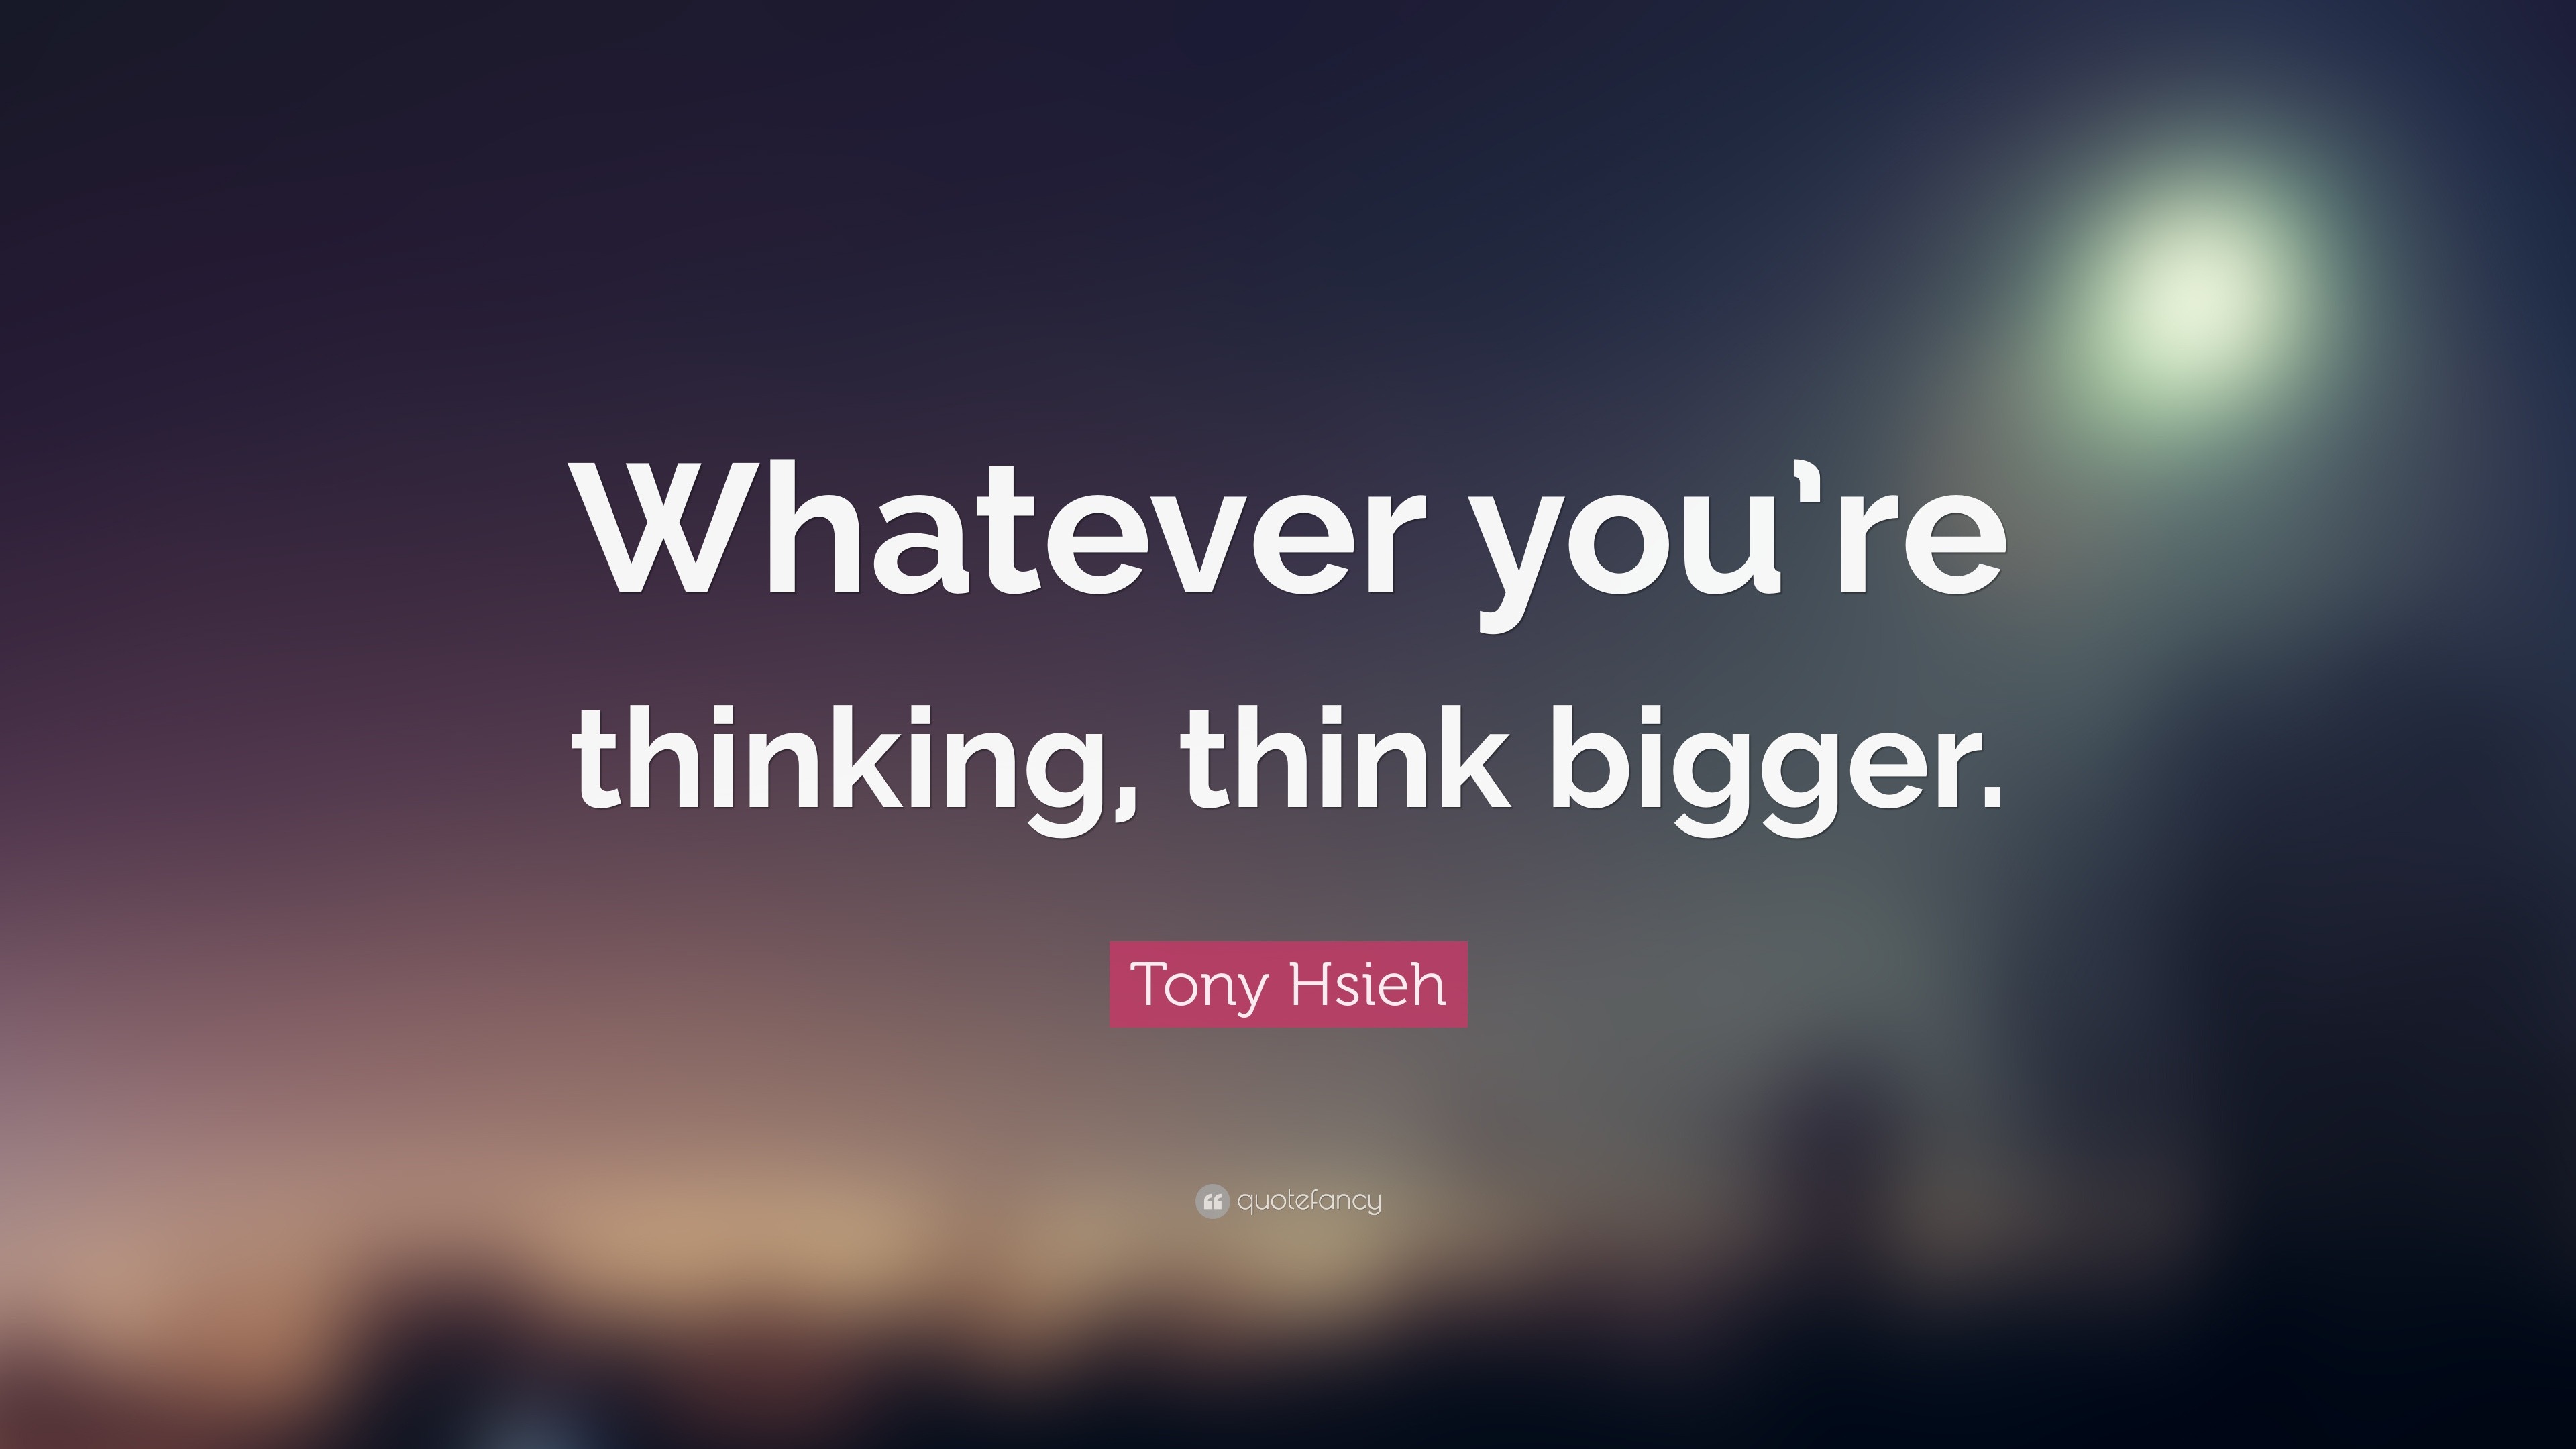 Tony Hsieh Quote: “Whatever you’re thinking, think bigger.” (28